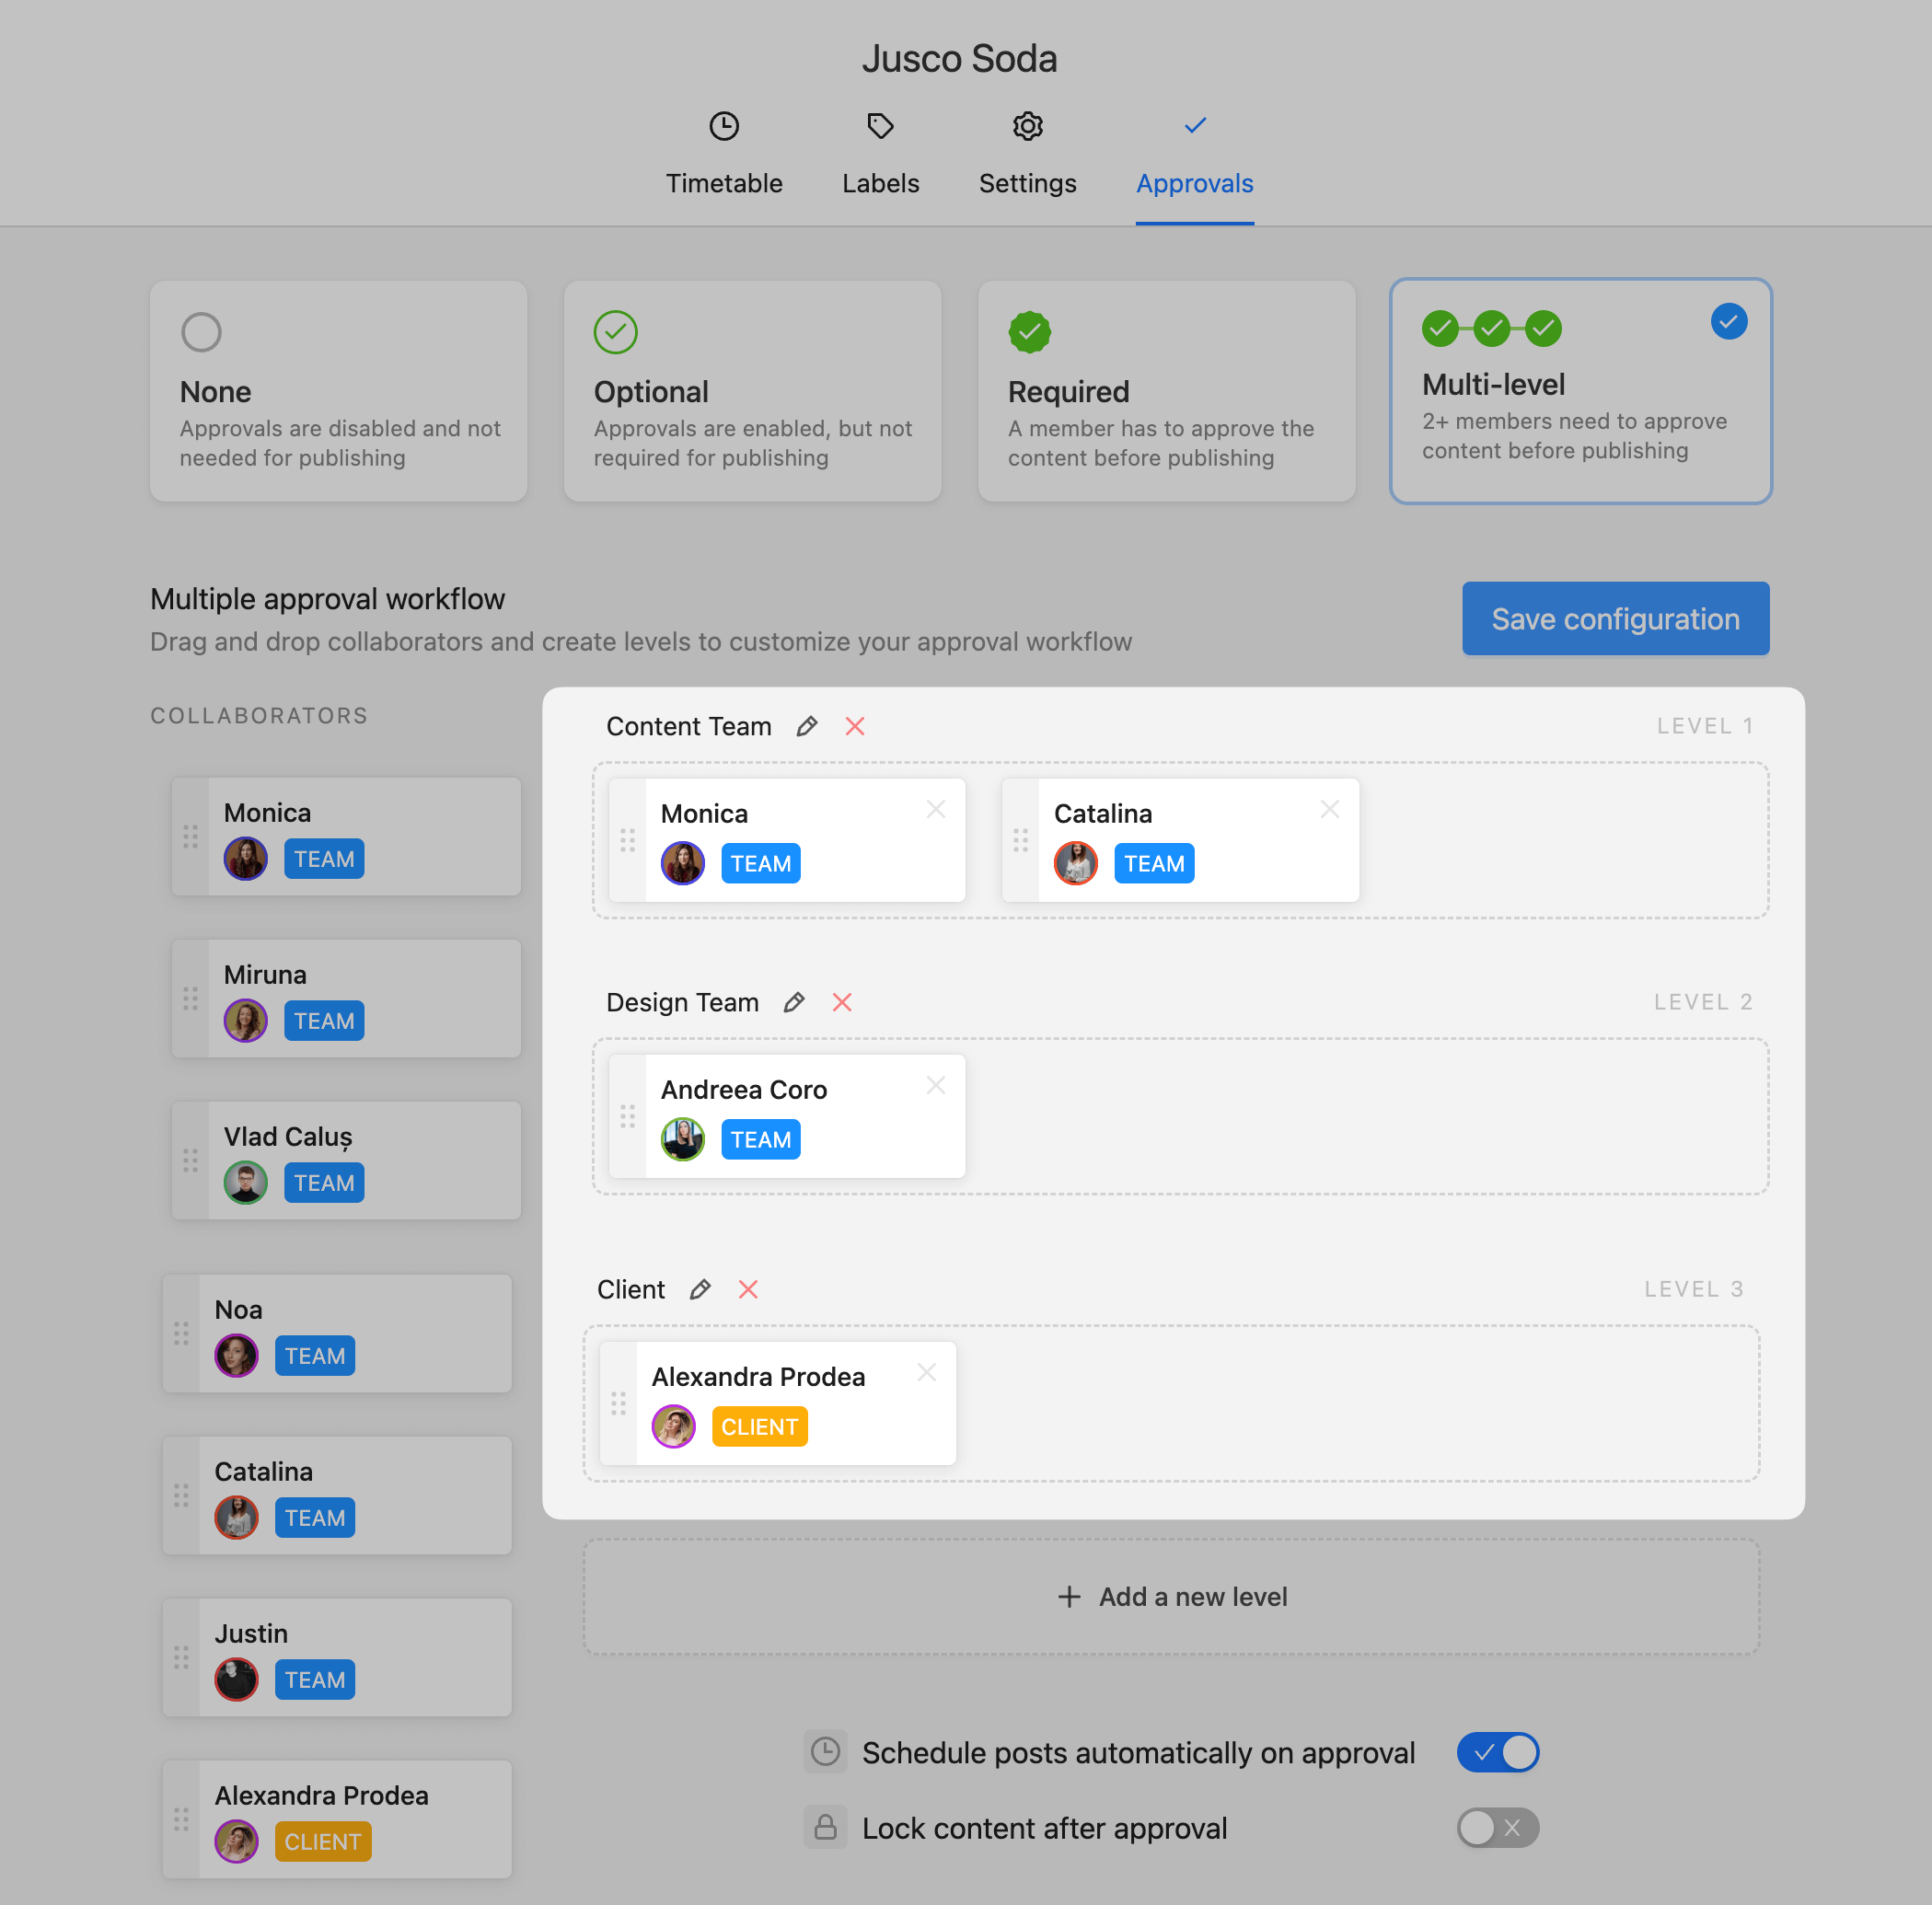 Collaboration settings showing multiple approval layers for content team, design team and client.